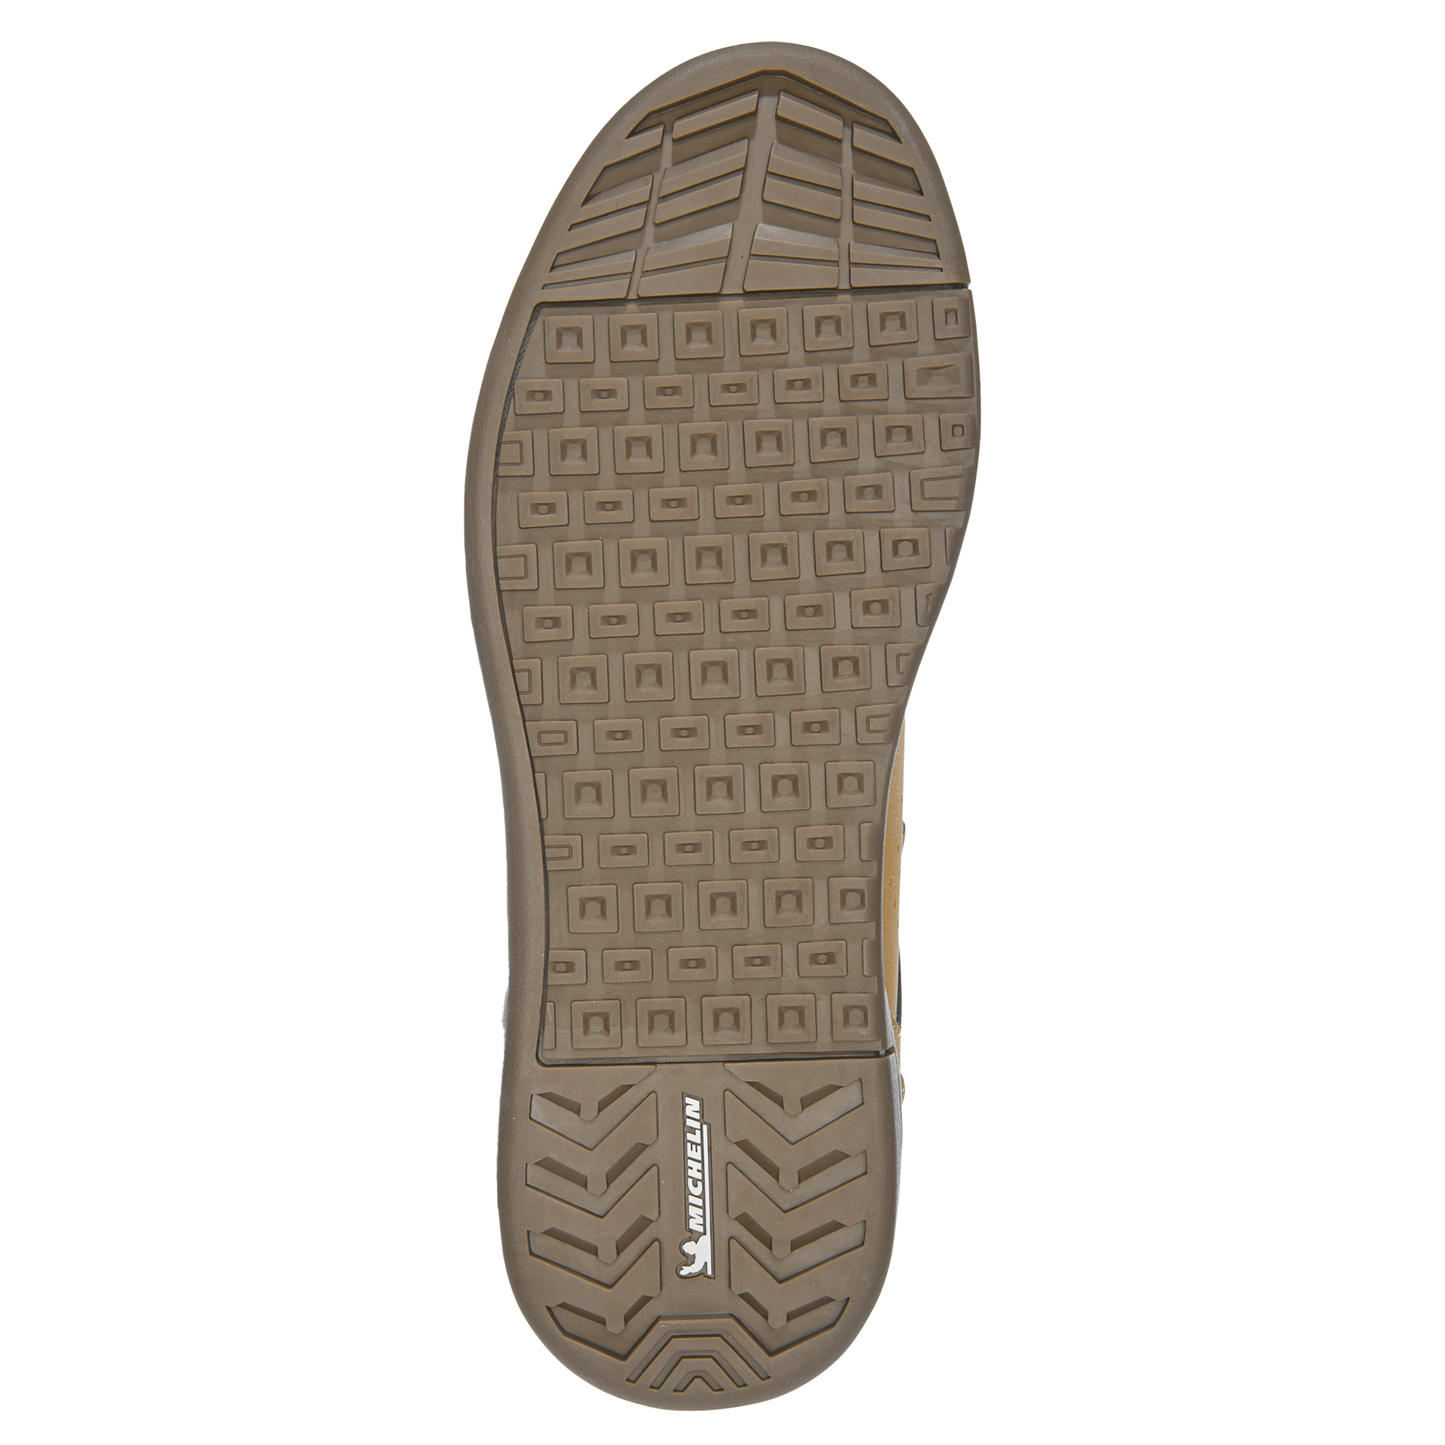 Etnies Camber Mid Michelin x TFTF Flat Shoes - US 12.0 - Tan - Gum - Image 4